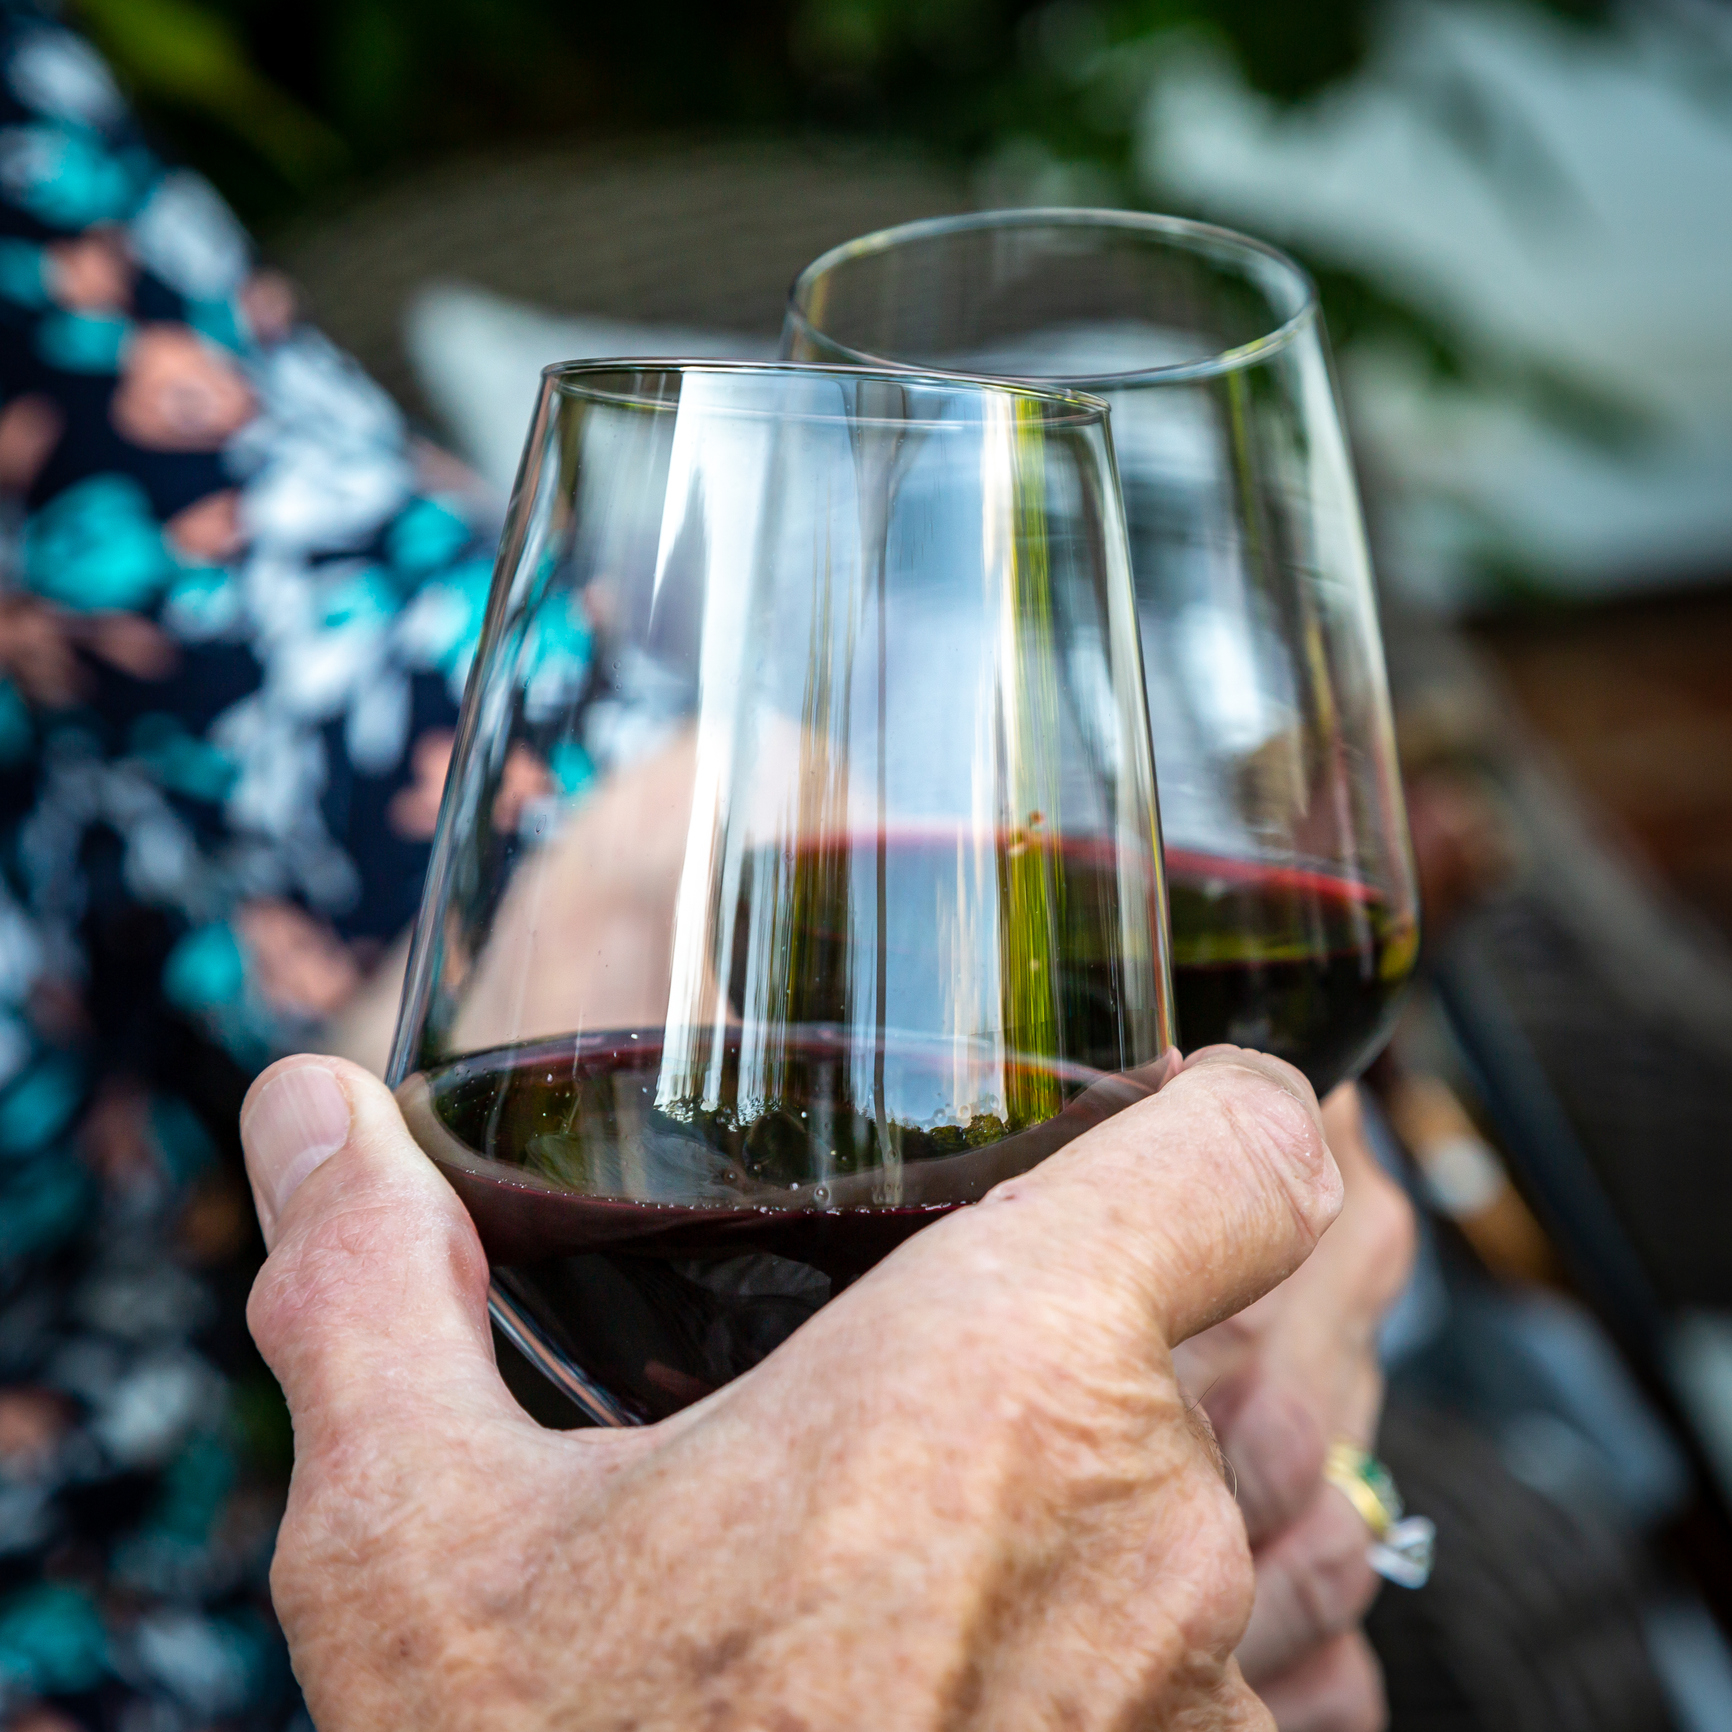 Two people clink glasses of red wine, hands visible. A floral-patterned shirt is partially seen in the background. 